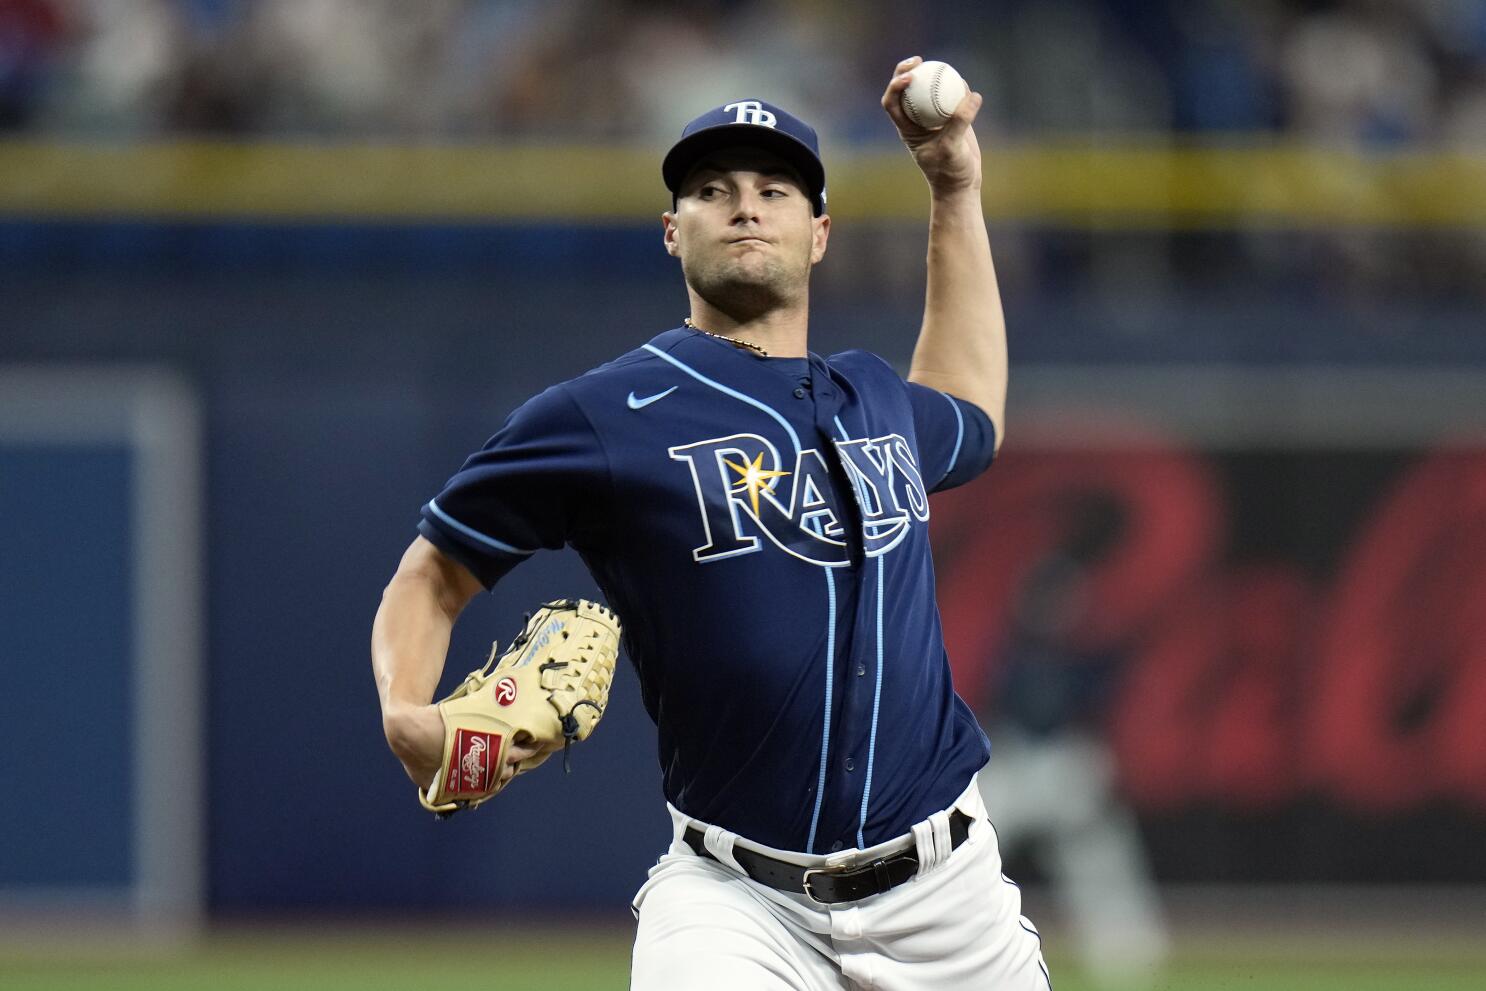 Choi Ji-man expected to rejoin Rays on Wednesday